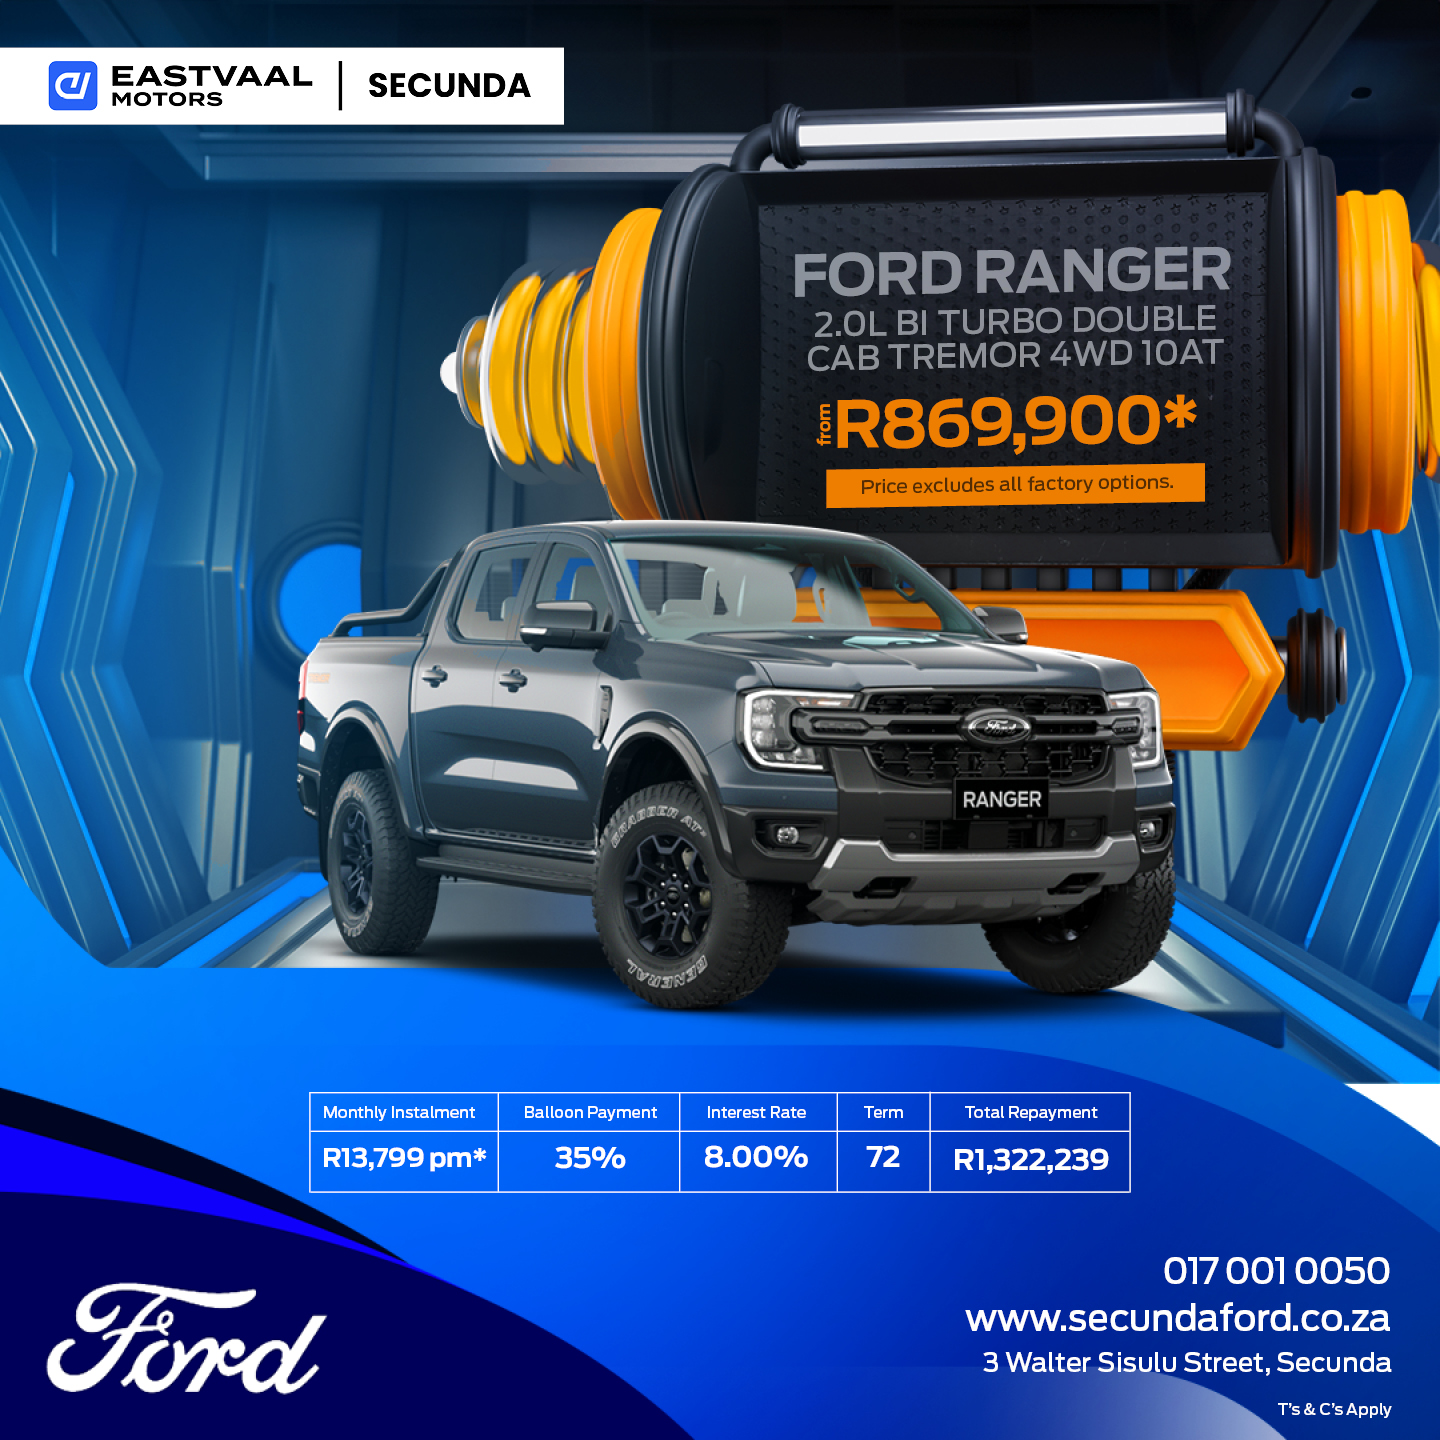 Ford Ranger 2.0L Bi Turbo Double Cab TREMOR 4WD 10AT image from 